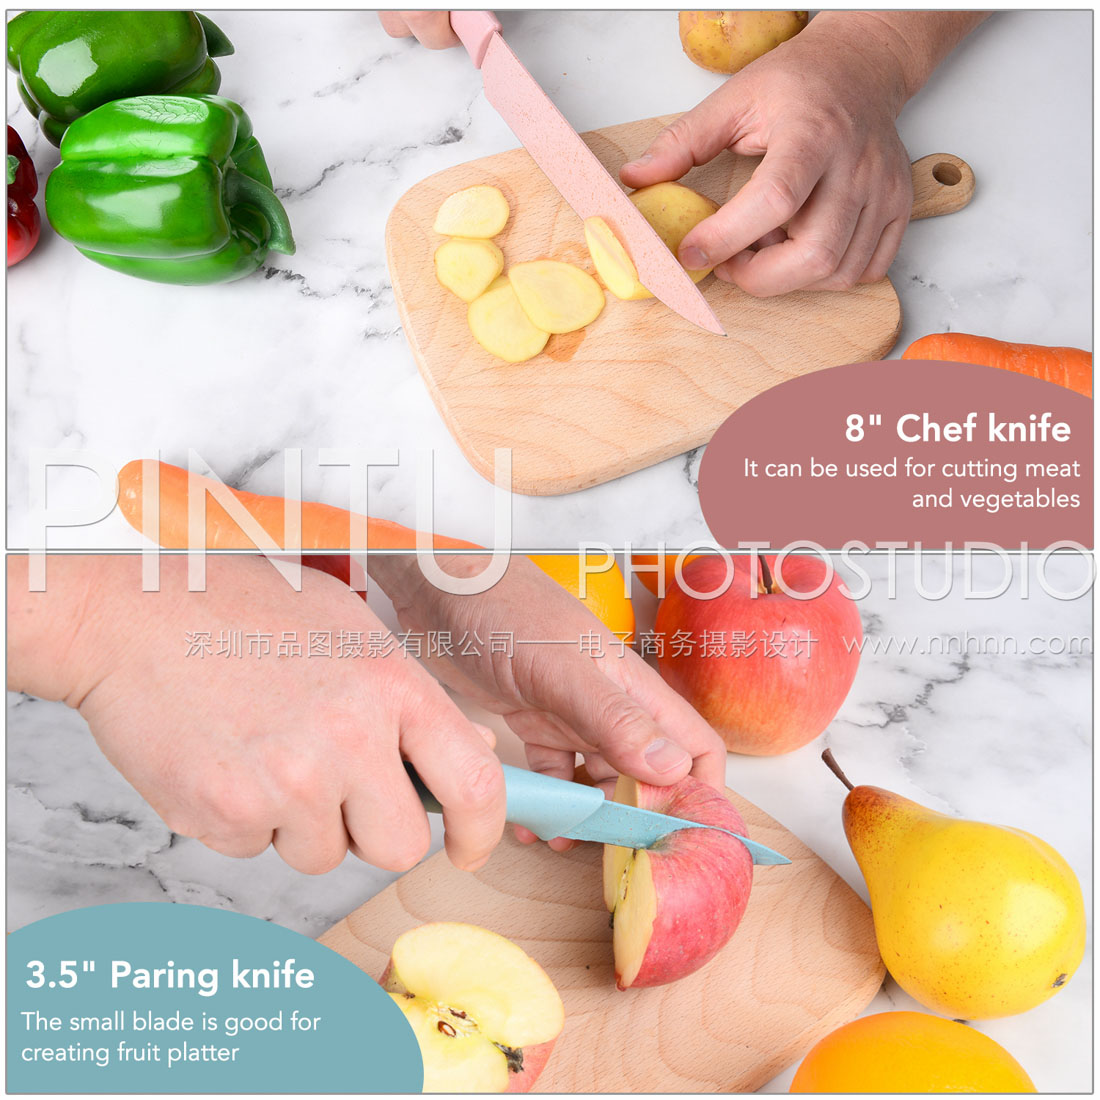 The best Amazon product photography in China Lifestyle kitchen knife potatoes / apples